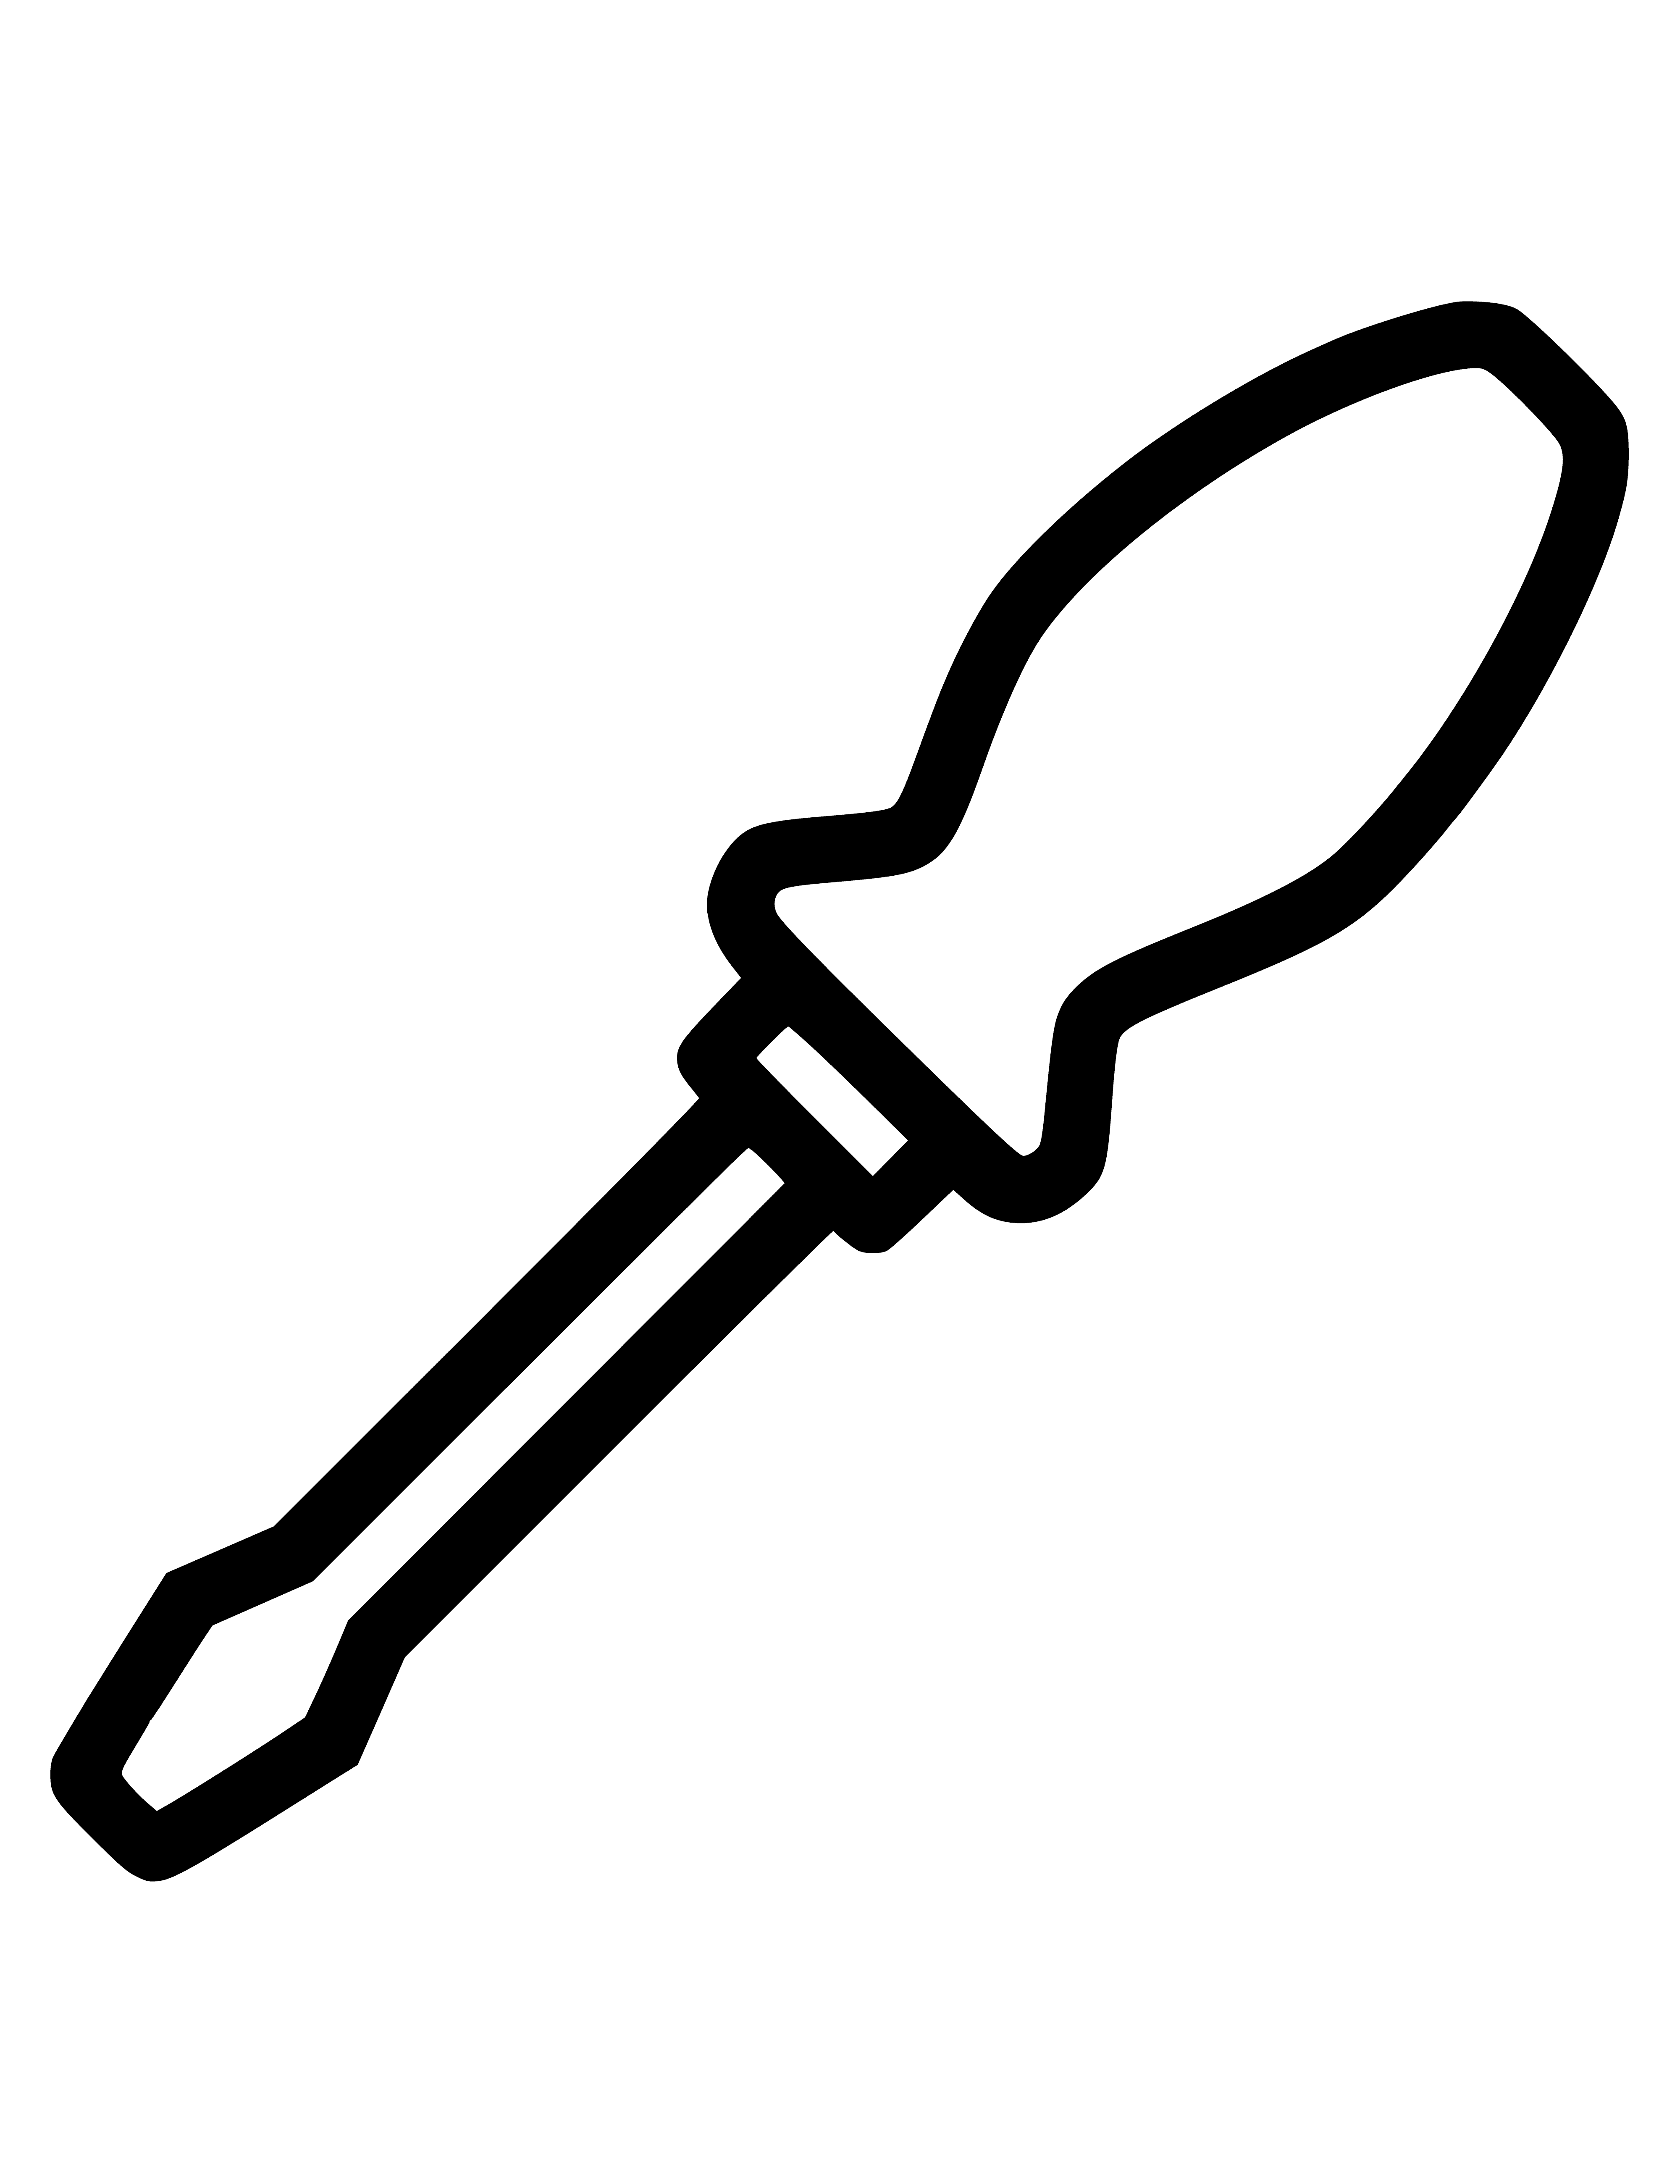 Screwdriver coloring page